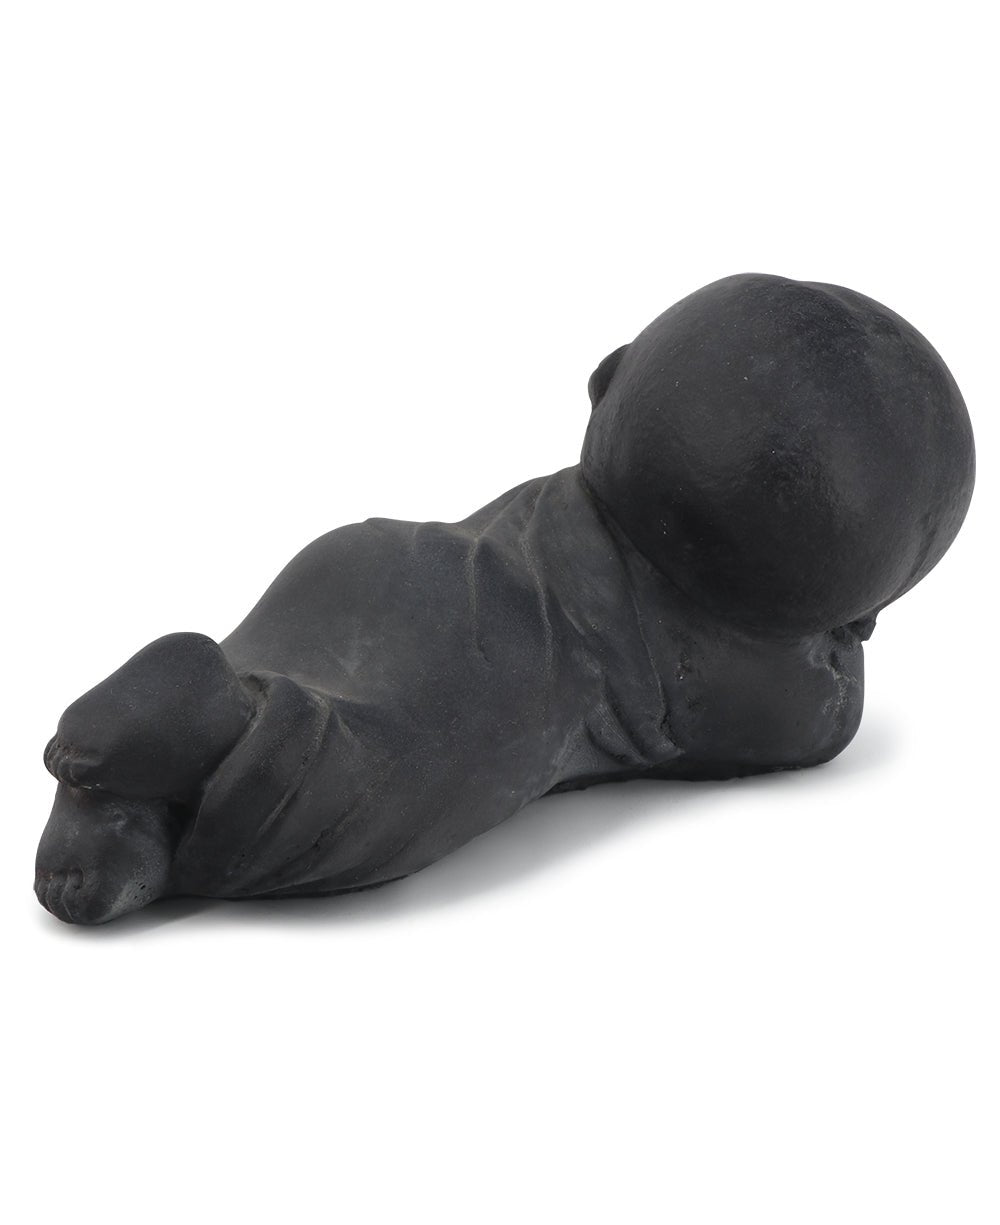 Aged Finish Sleeping Baby Monk Garden Statue, USA - Sculptures & Statues Earthy Brown